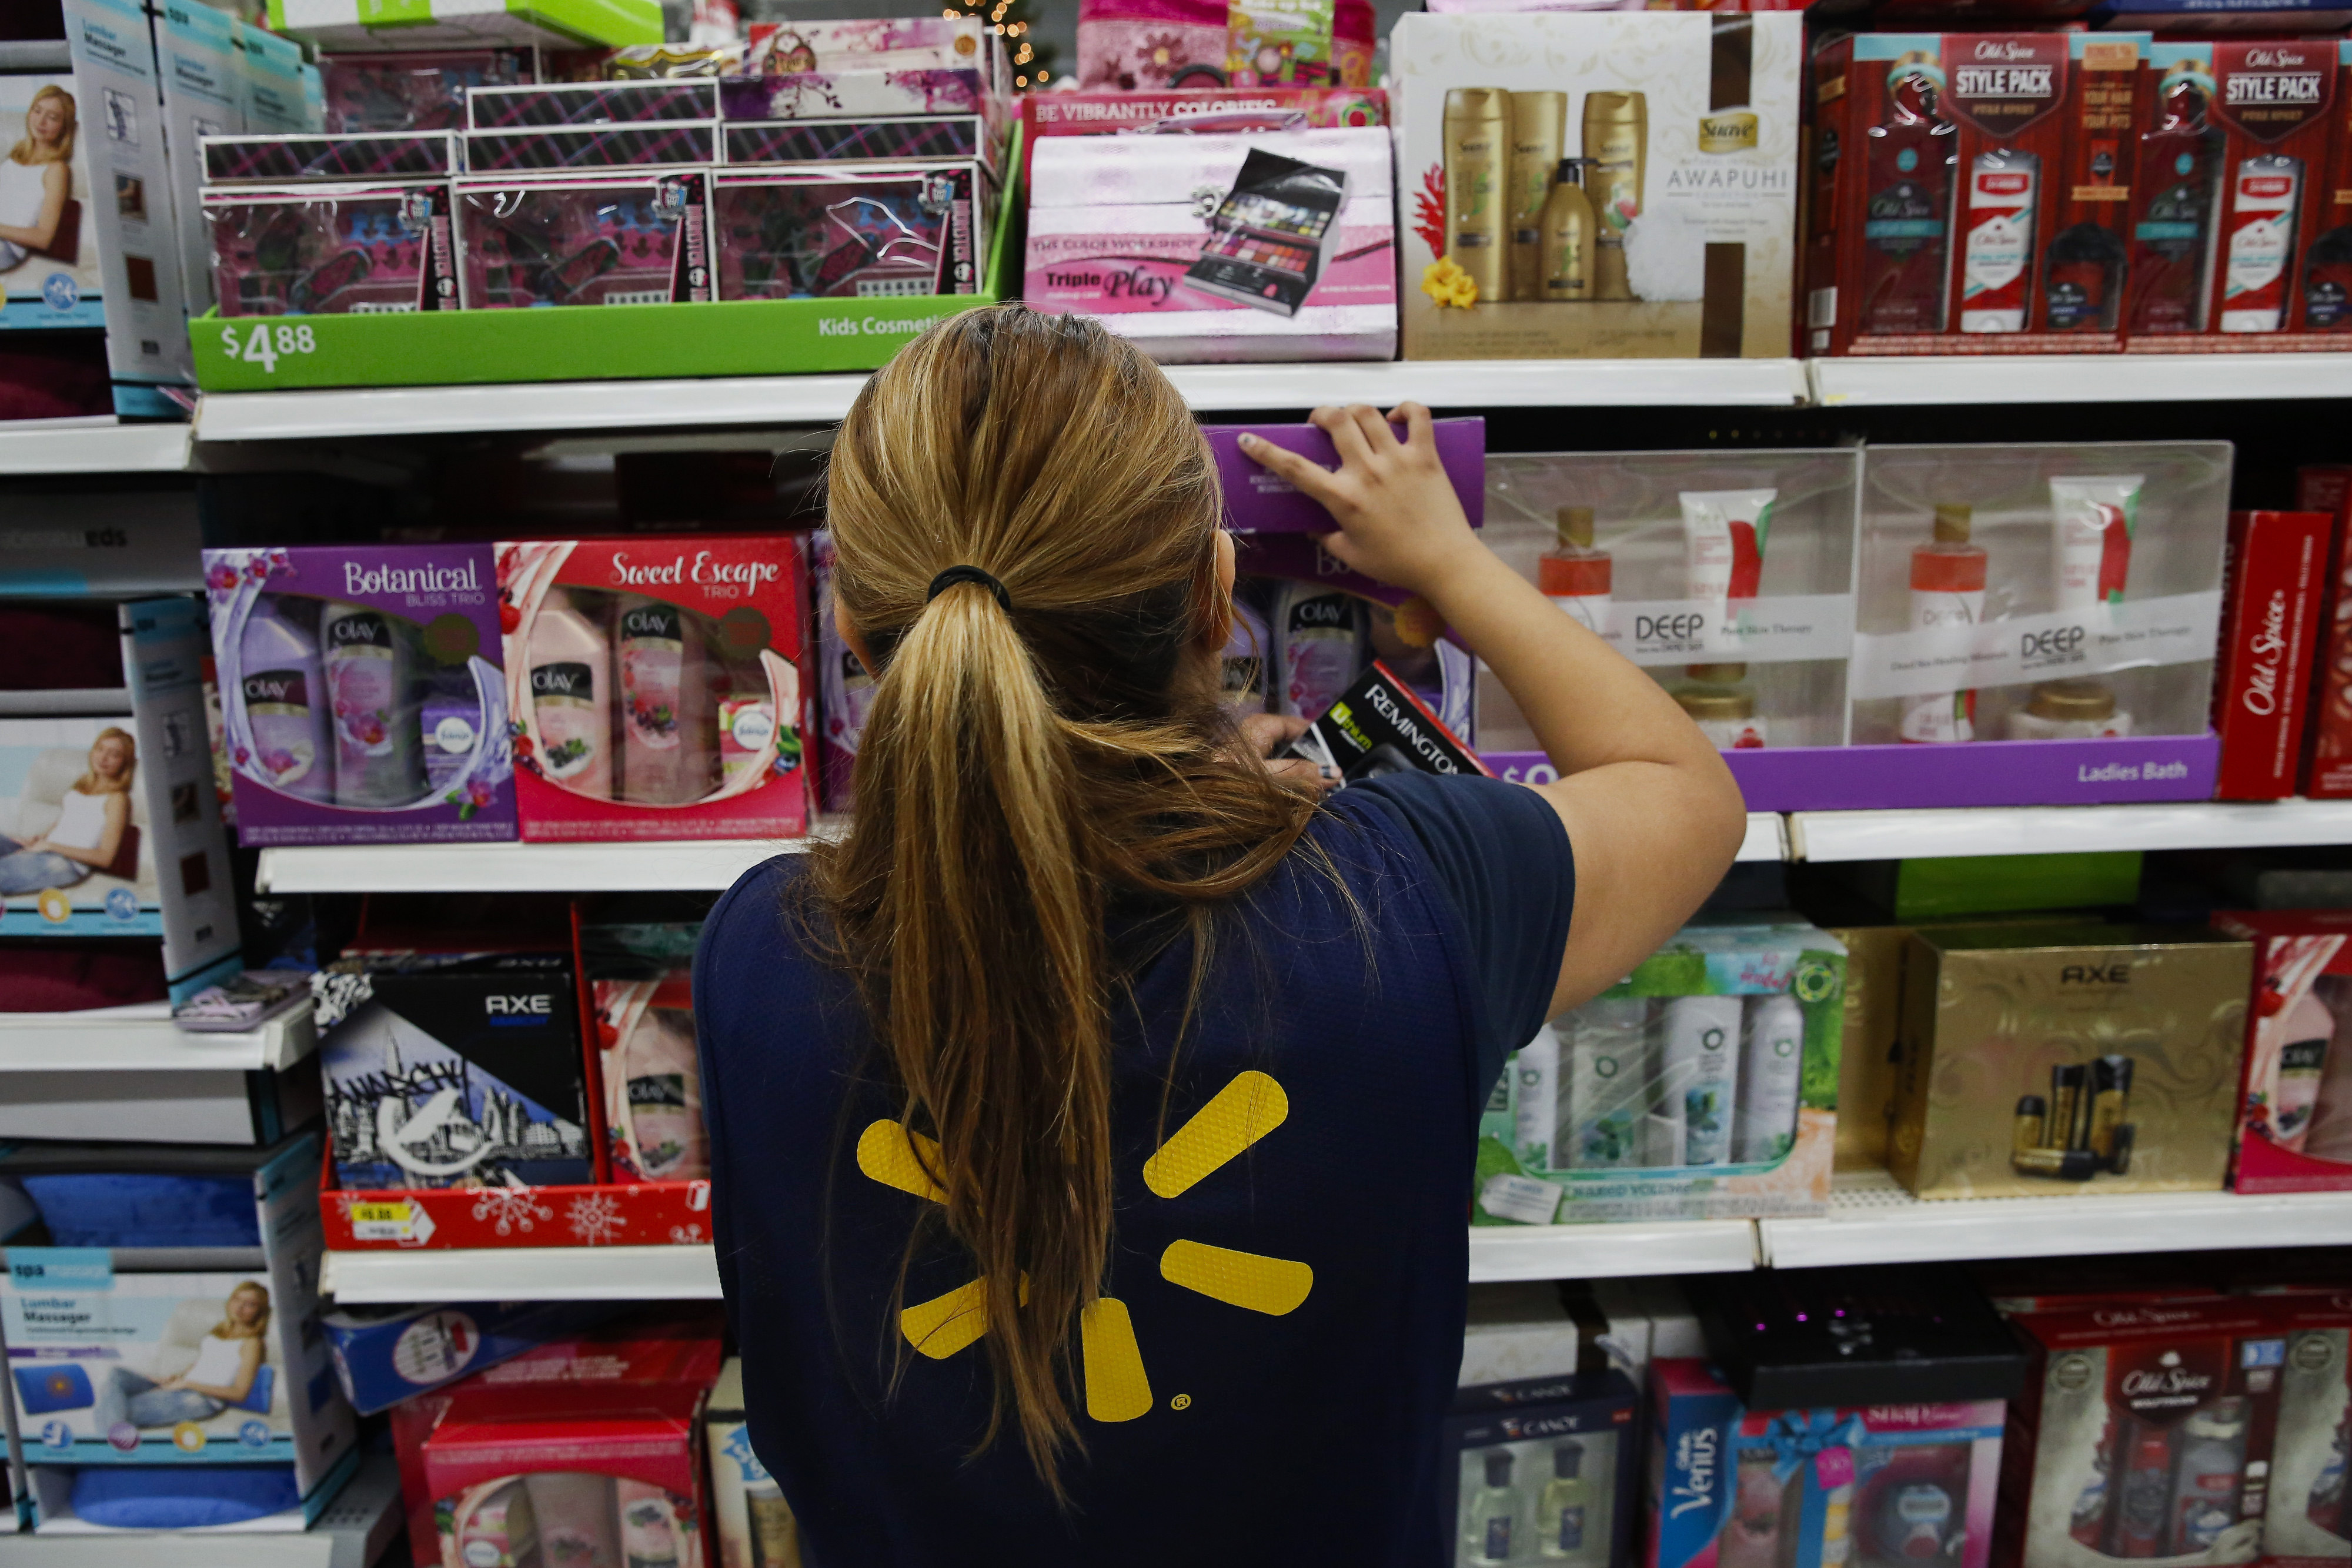 An employee arranges beauty products at a Wal-Mart location in Los Angeles.
